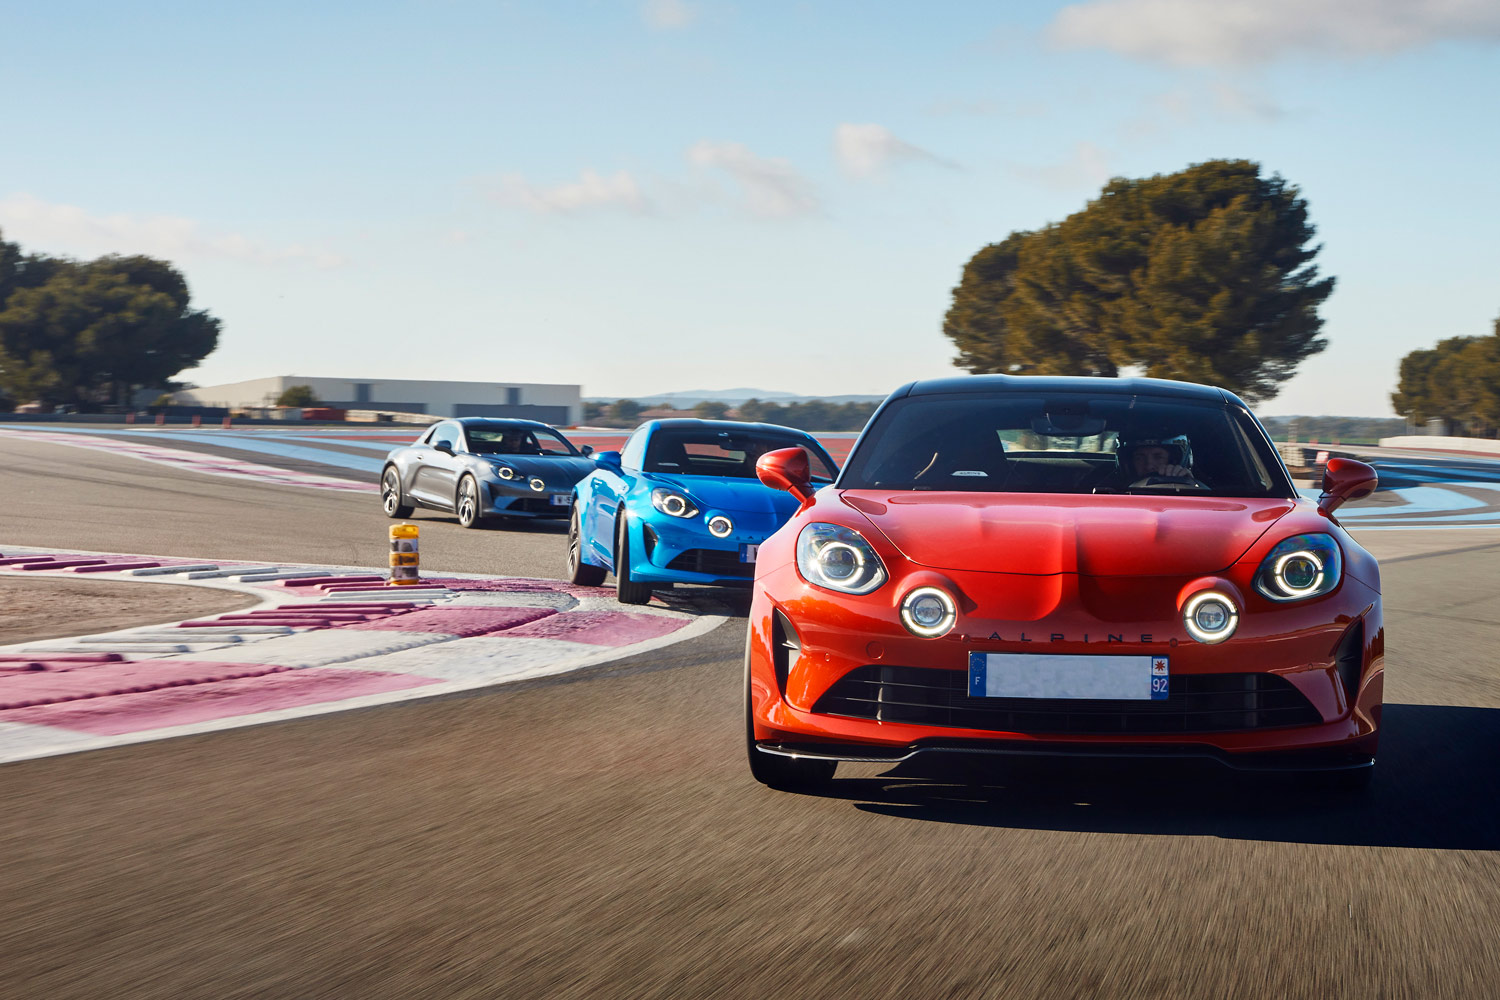 Three Alpine sports cars undefined red, blue, and gray undefined chase each other on a racetrack